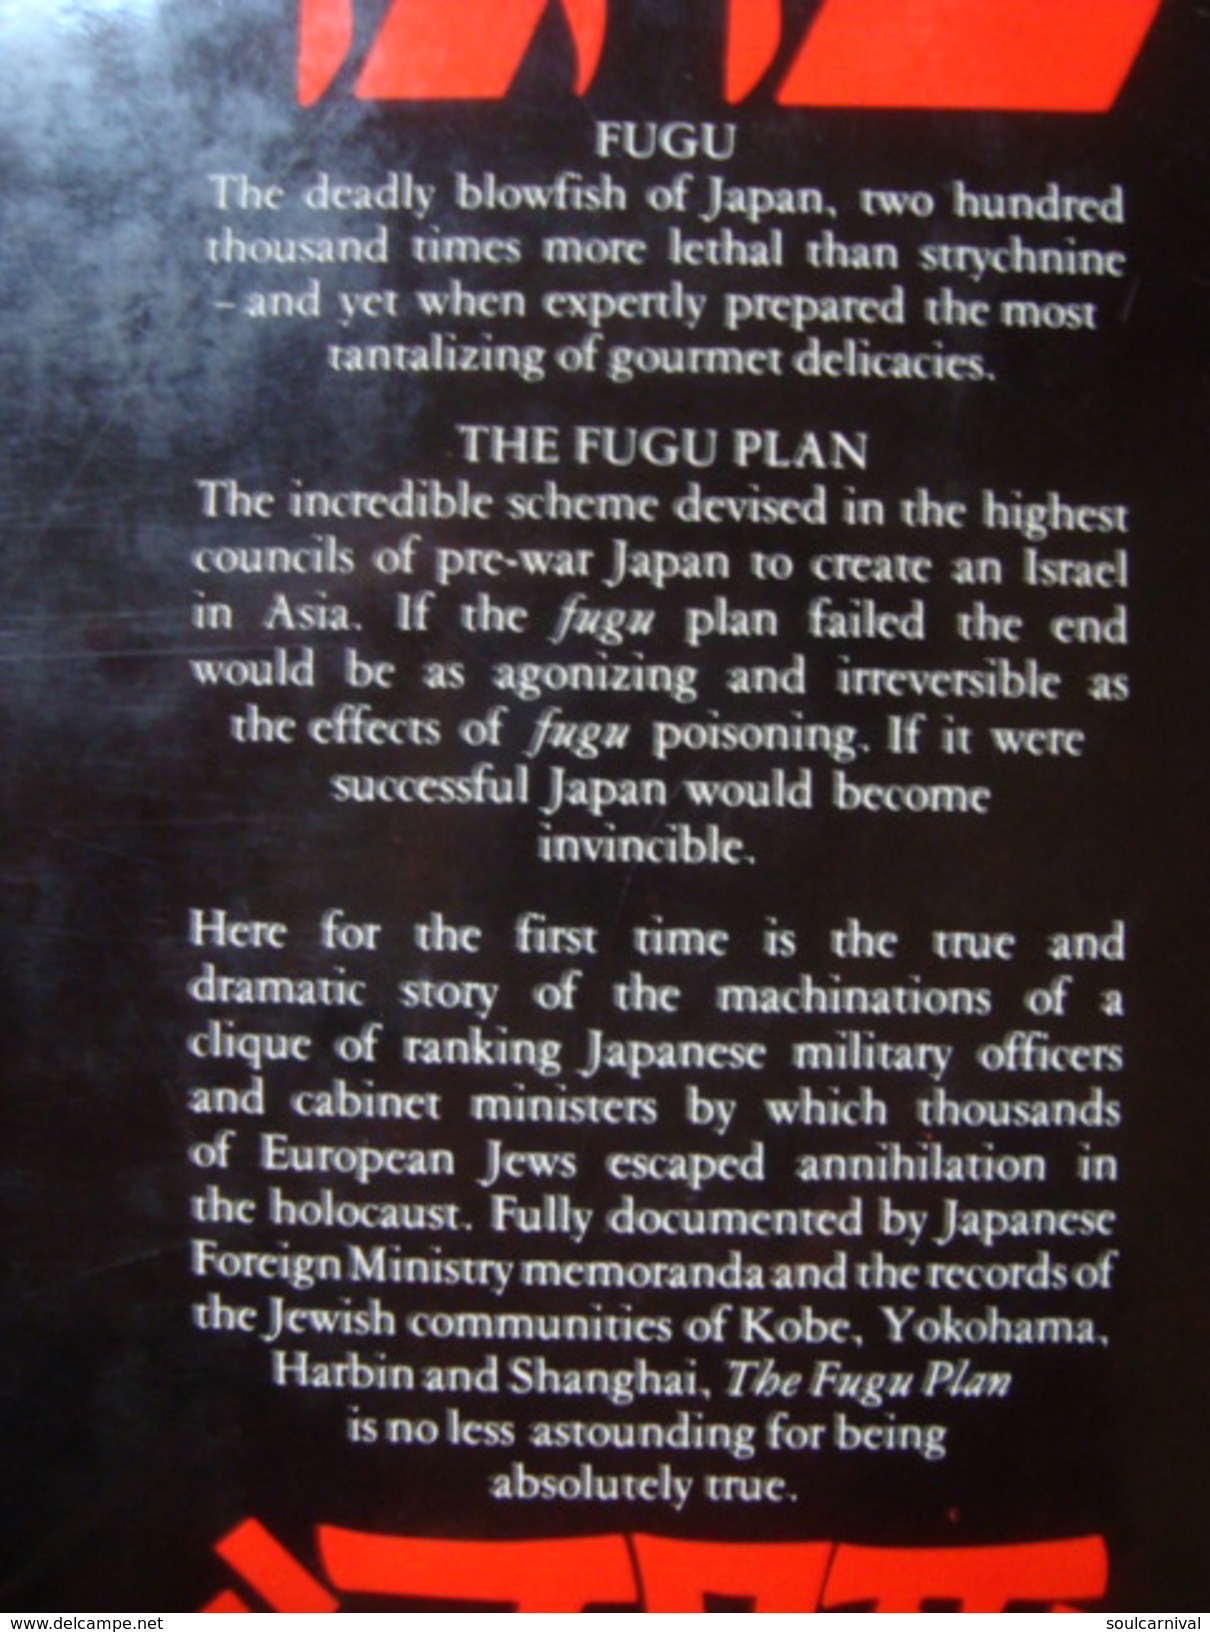 THE FUGU PLAN. THE UNTOLD STORY OF THE JAPANESE AND THE JEWS DURING WORLD WAR II - TOKAYER SWARTZ (1979). WWII - Azië